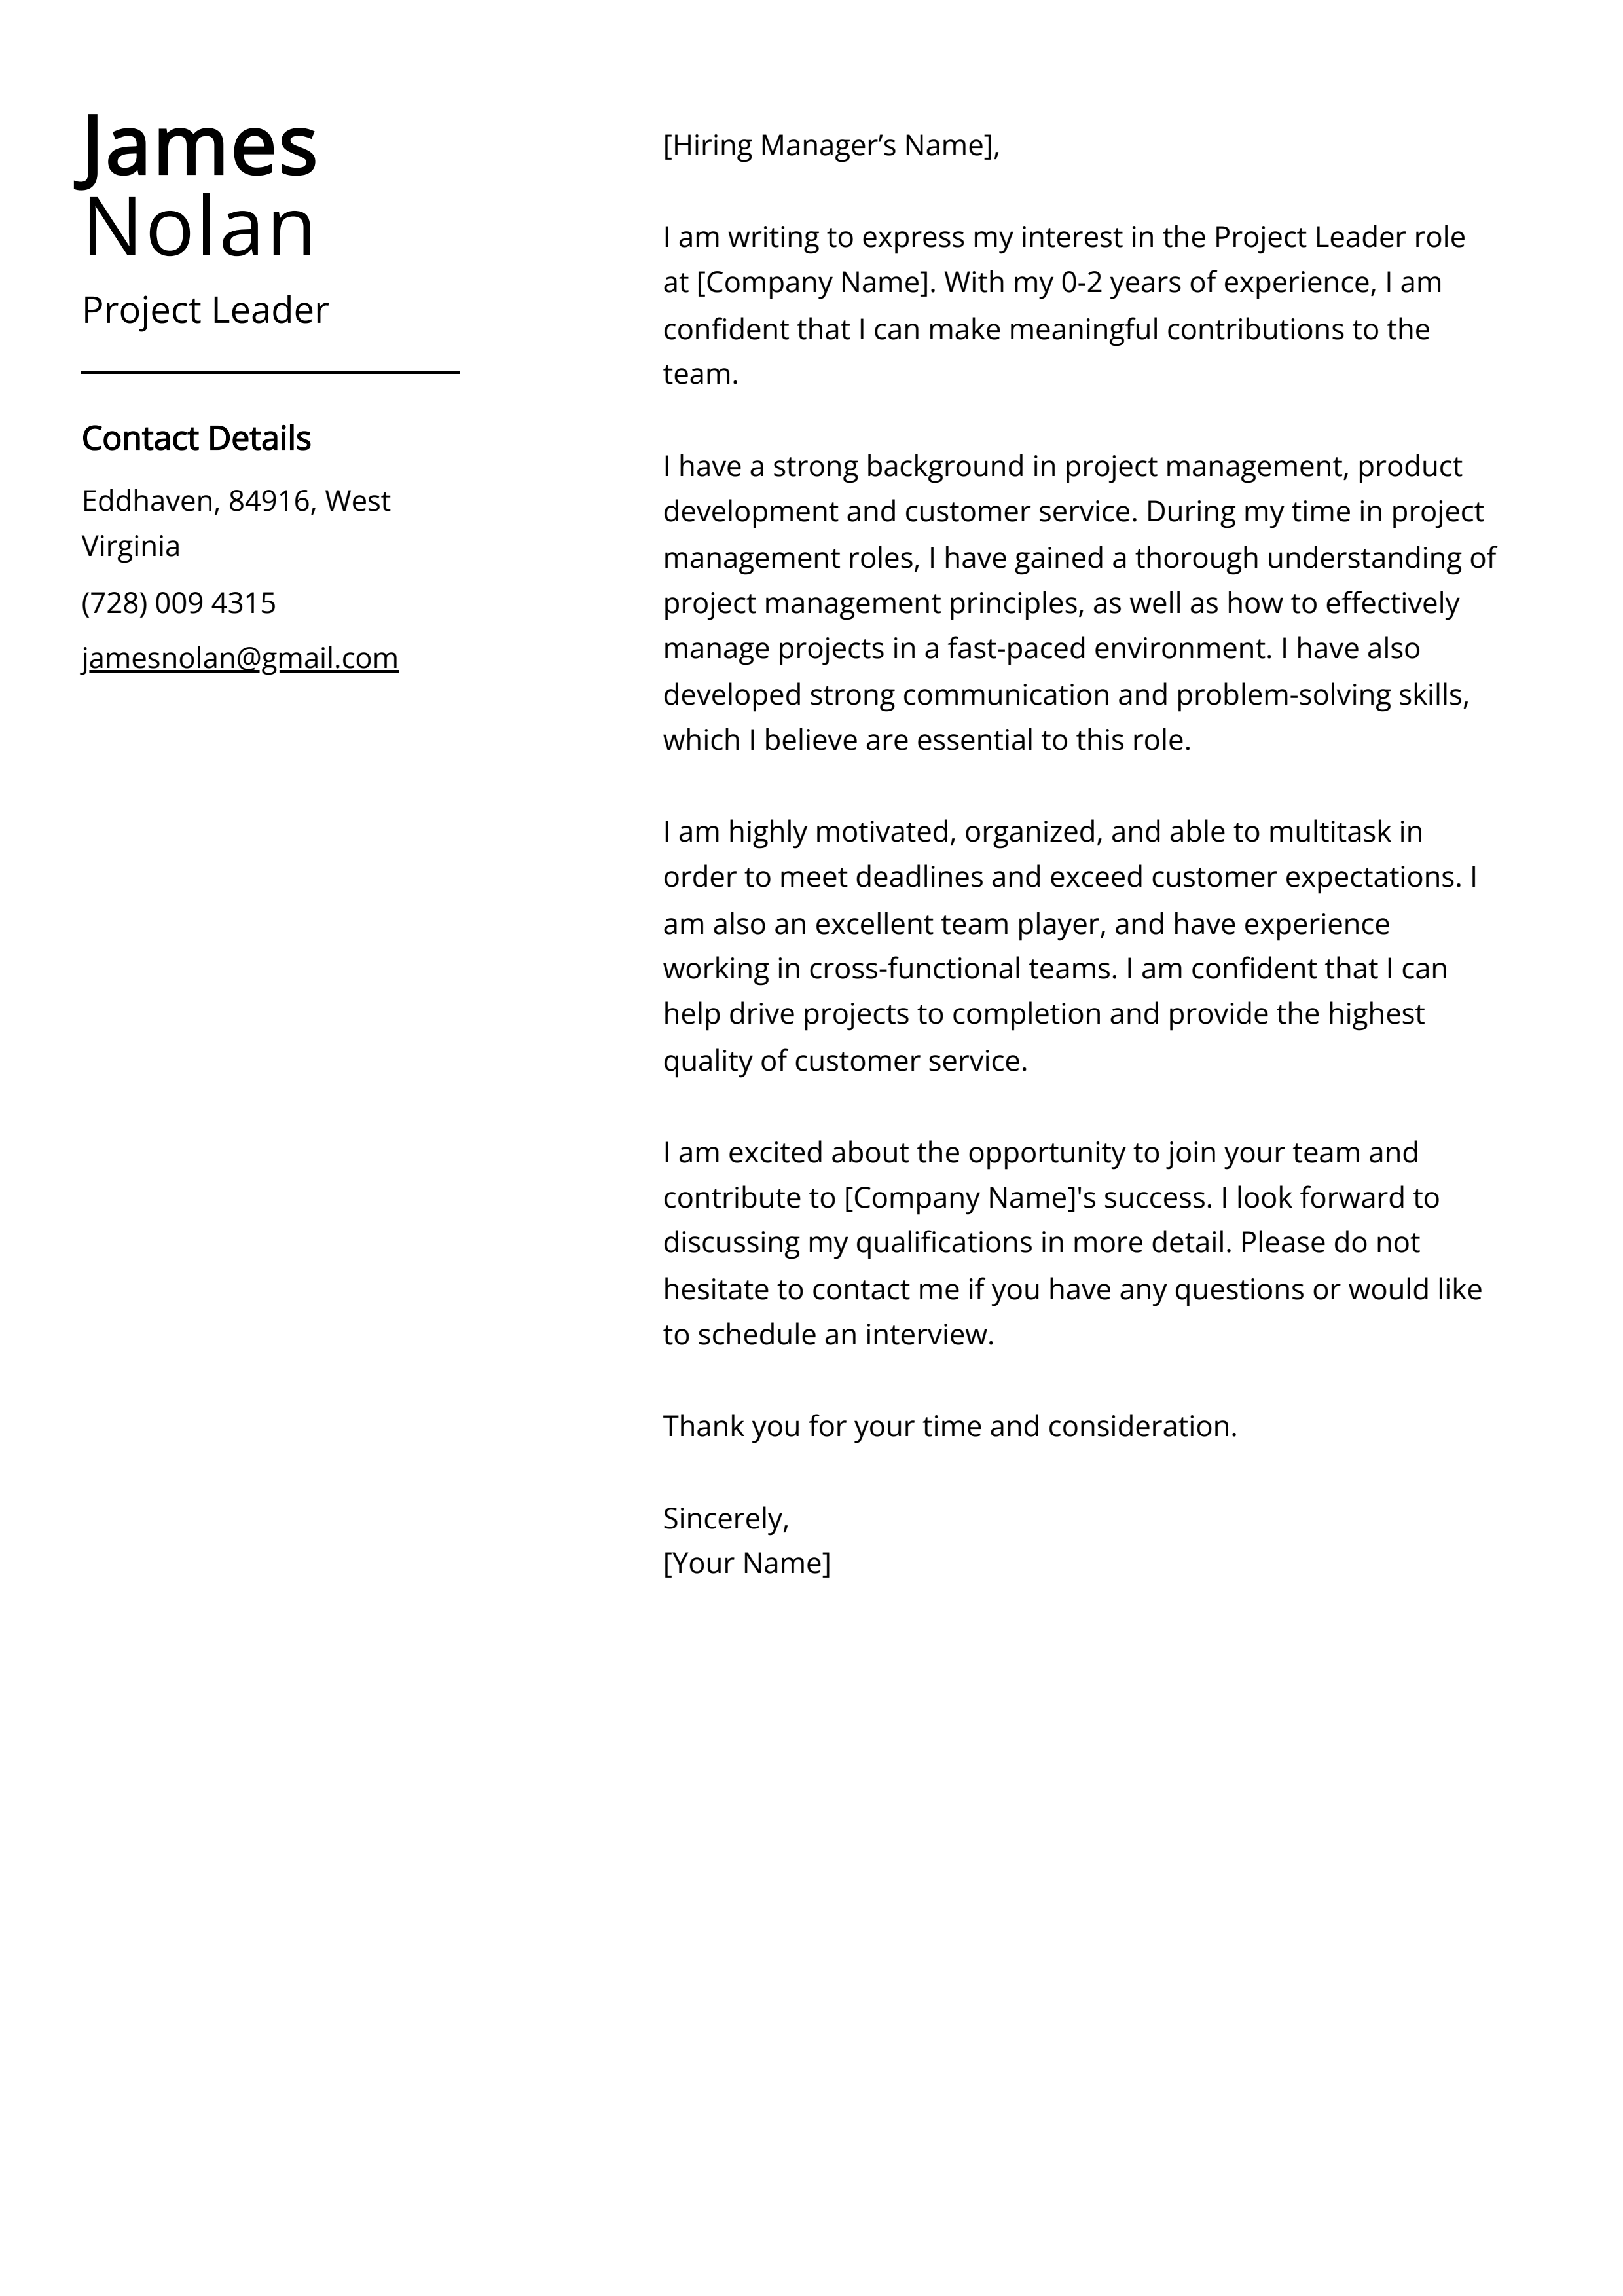 Project Leader Cover Letter Example